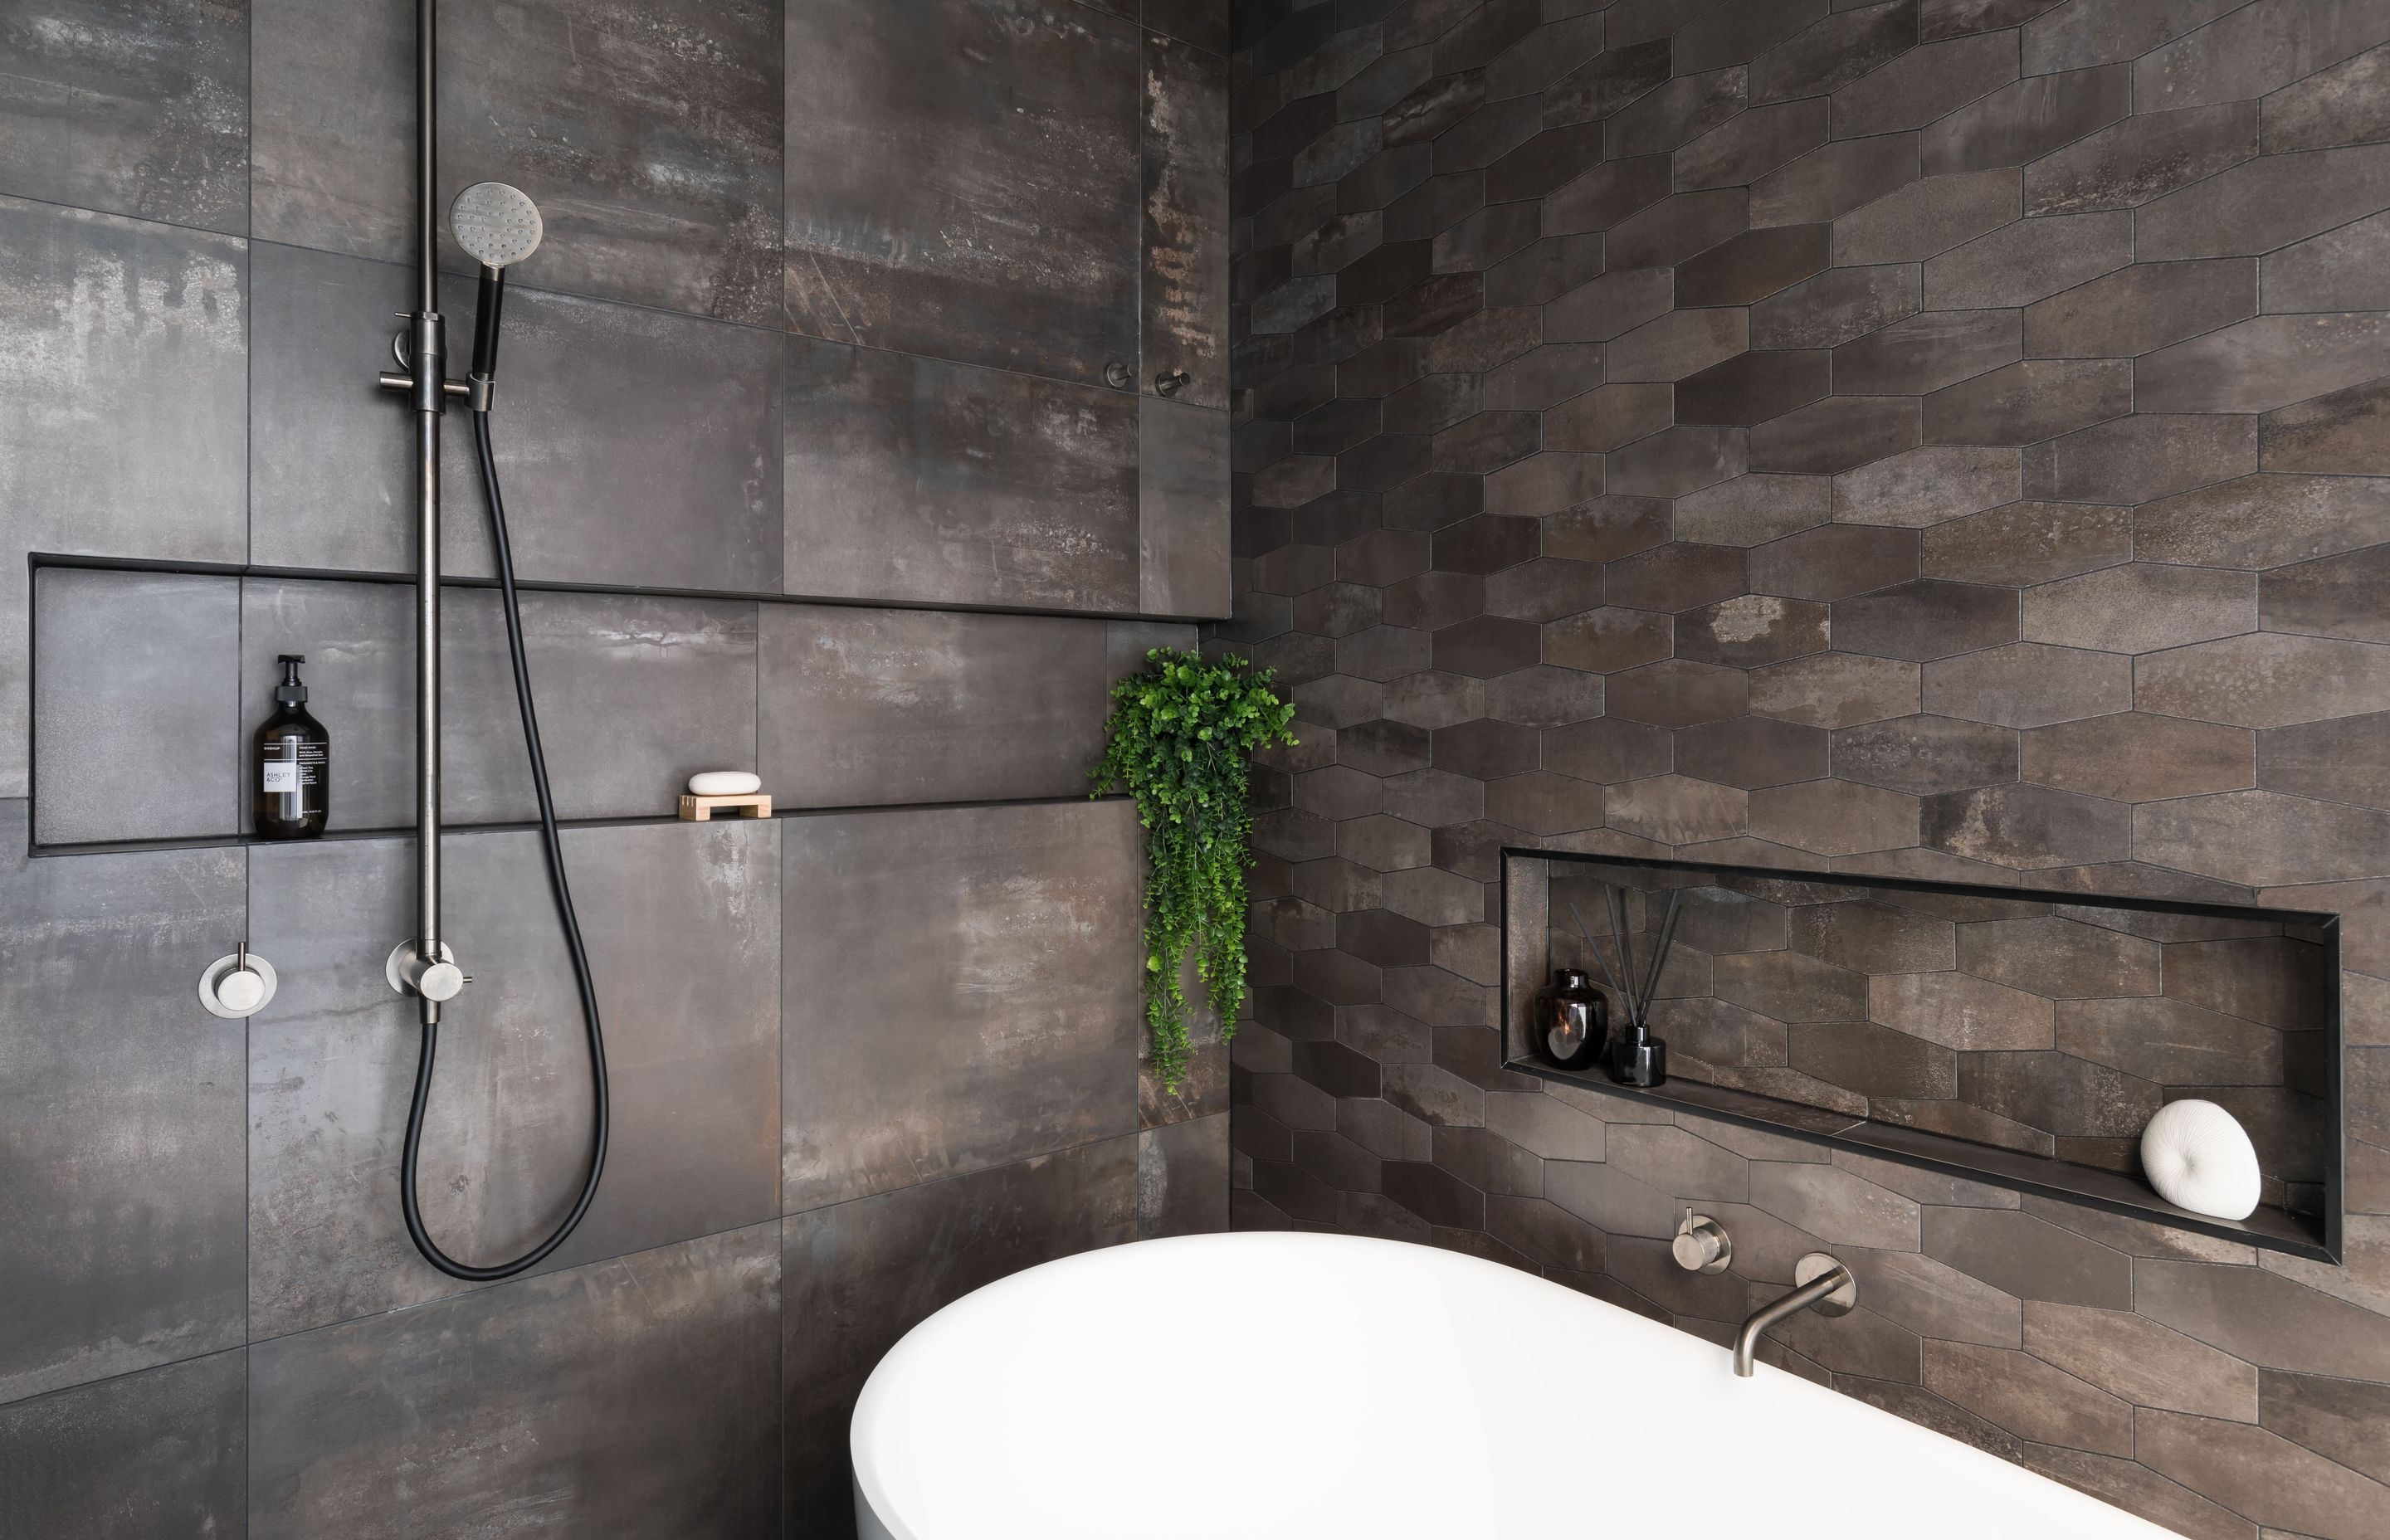 Ensuite Bathroom - tiled niches, the one above the bath has LED lighting